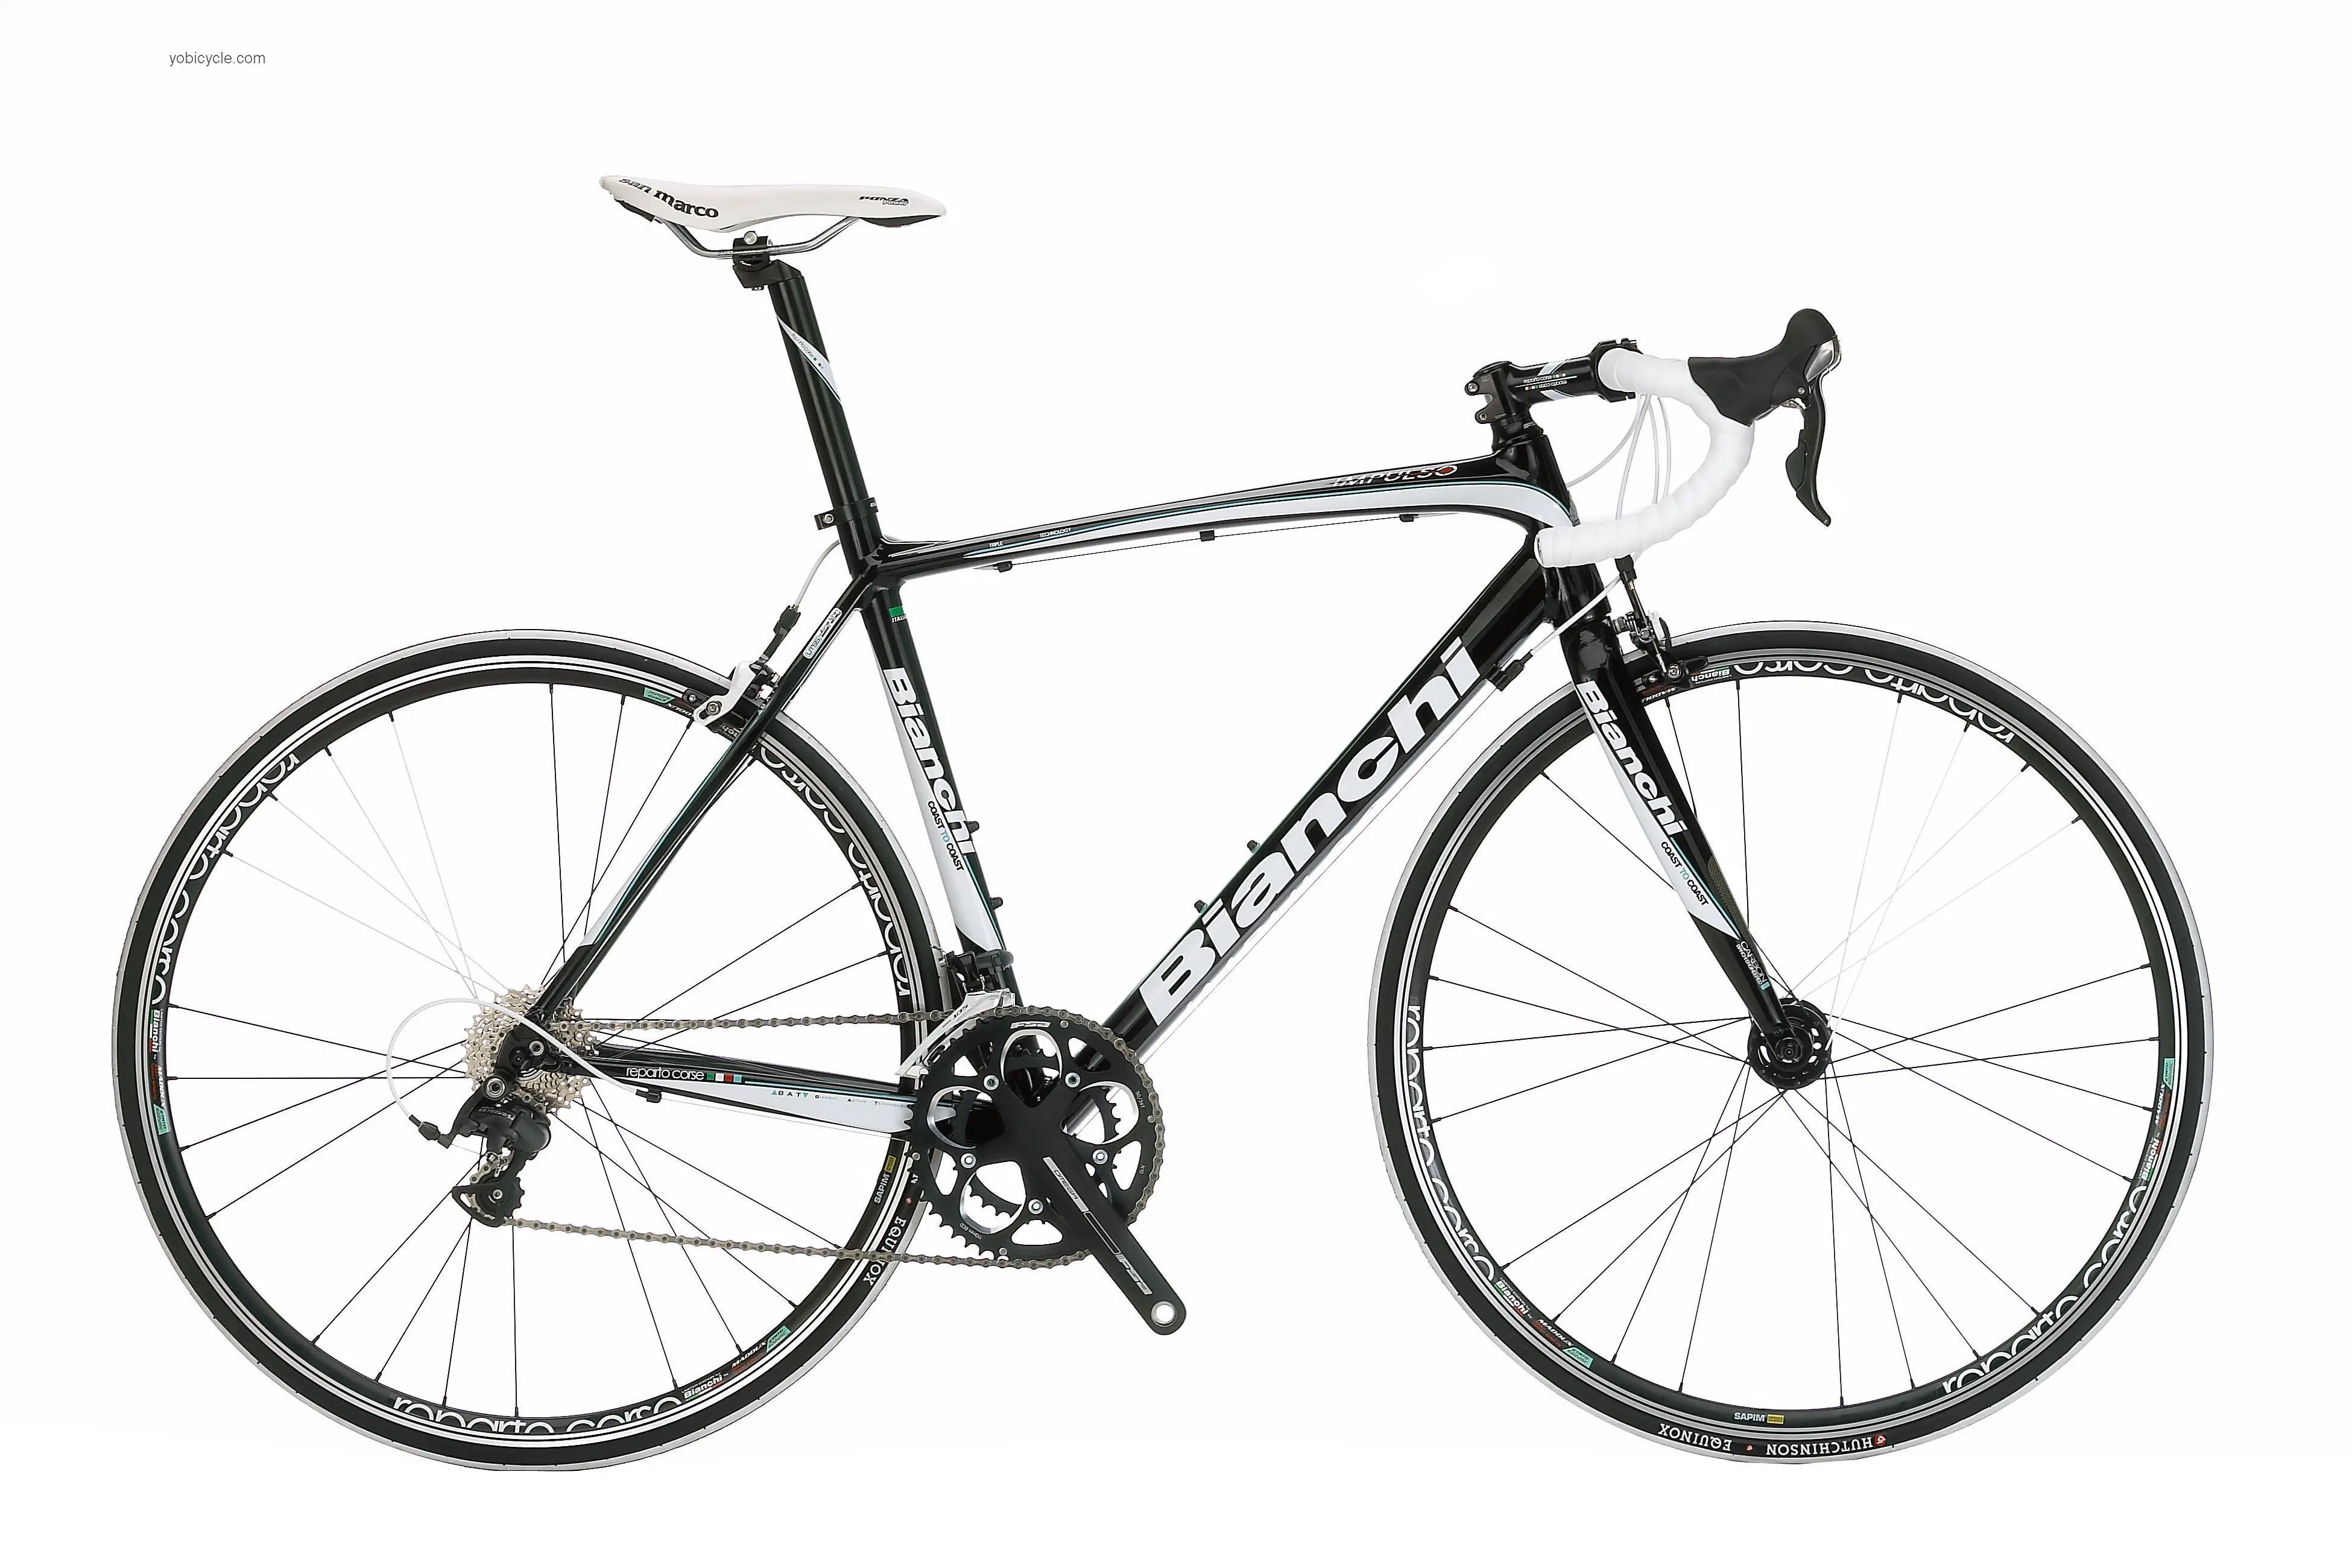 Bianchi Impulso Ultegra competitors and comparison tool online specs and performance